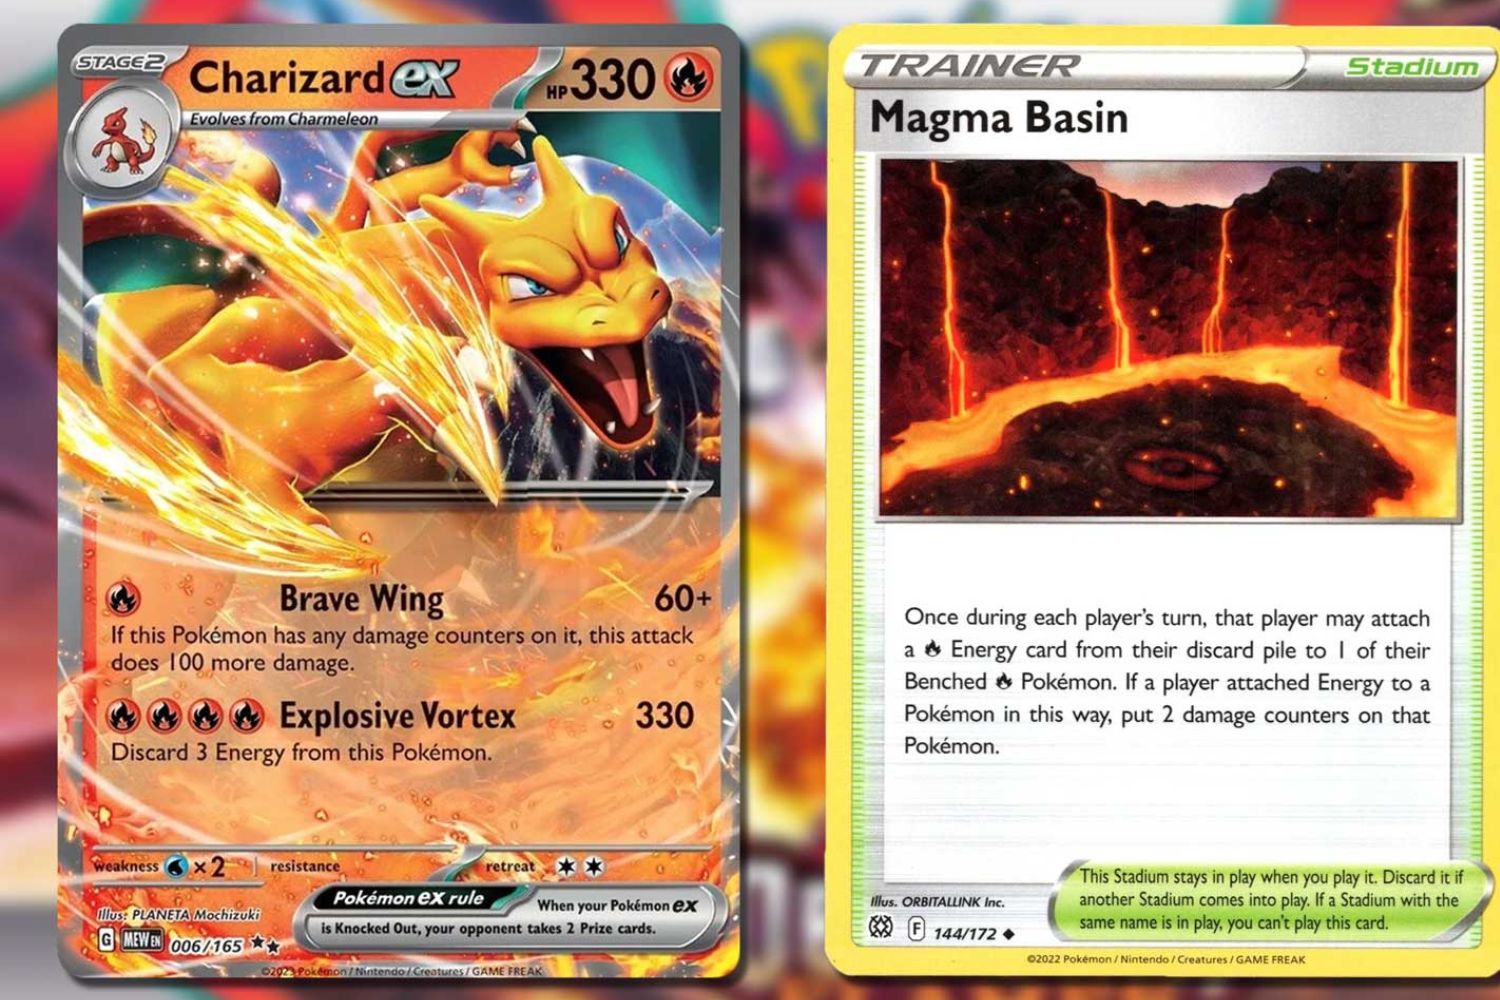 8-surprising-facts-about-charizard-ex